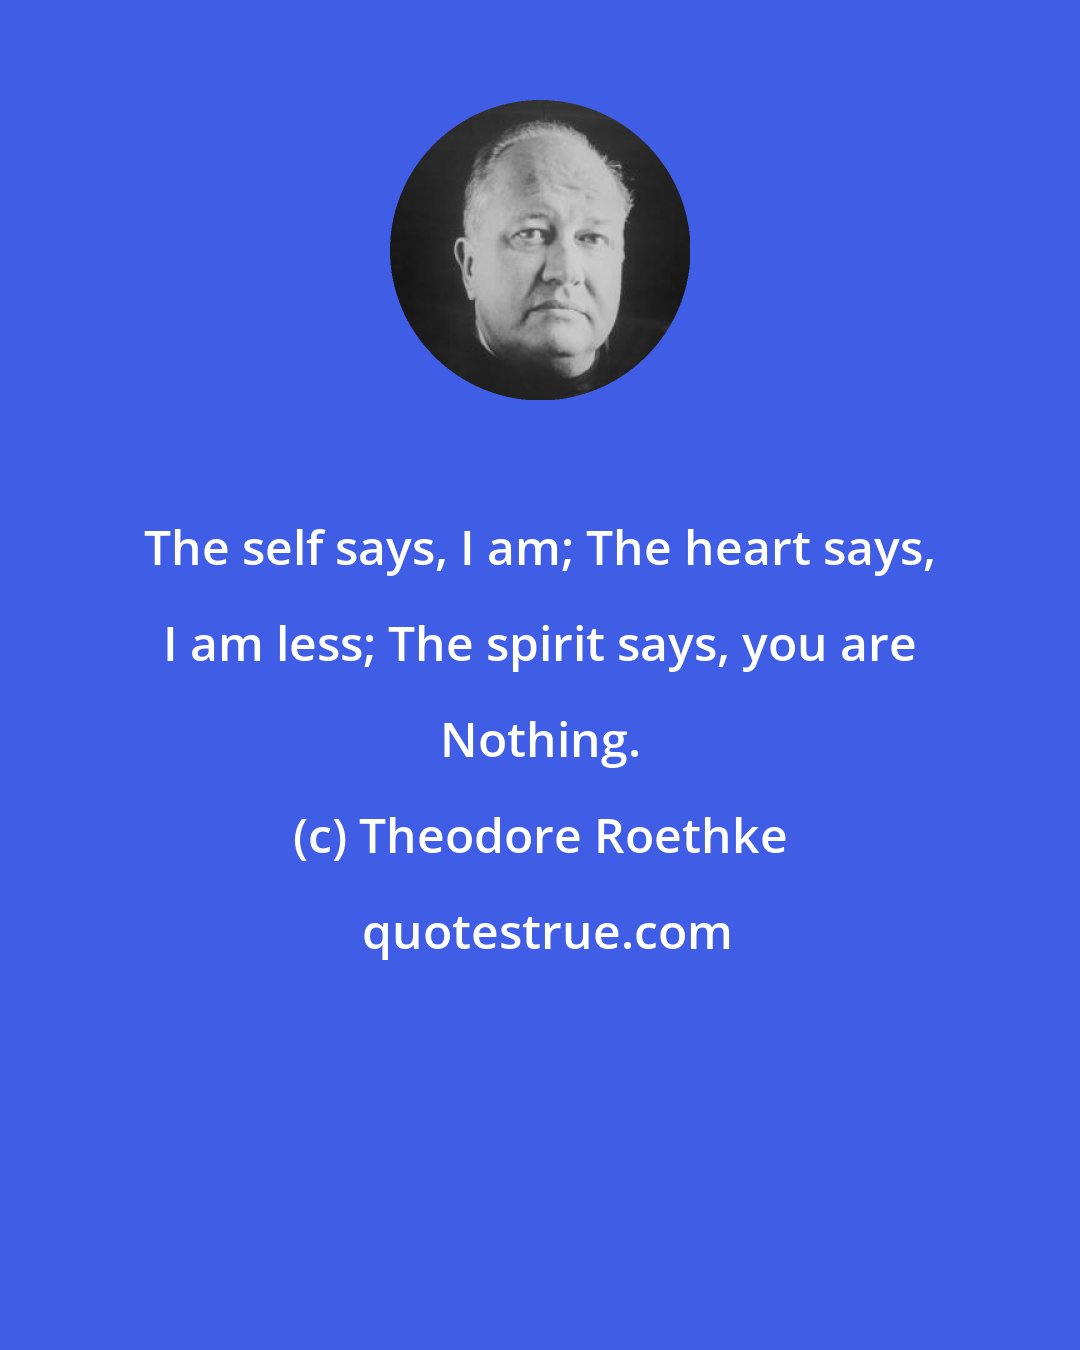 Theodore Roethke: The self says, I am; The heart says, I am less; The spirit says, you are Nothing.